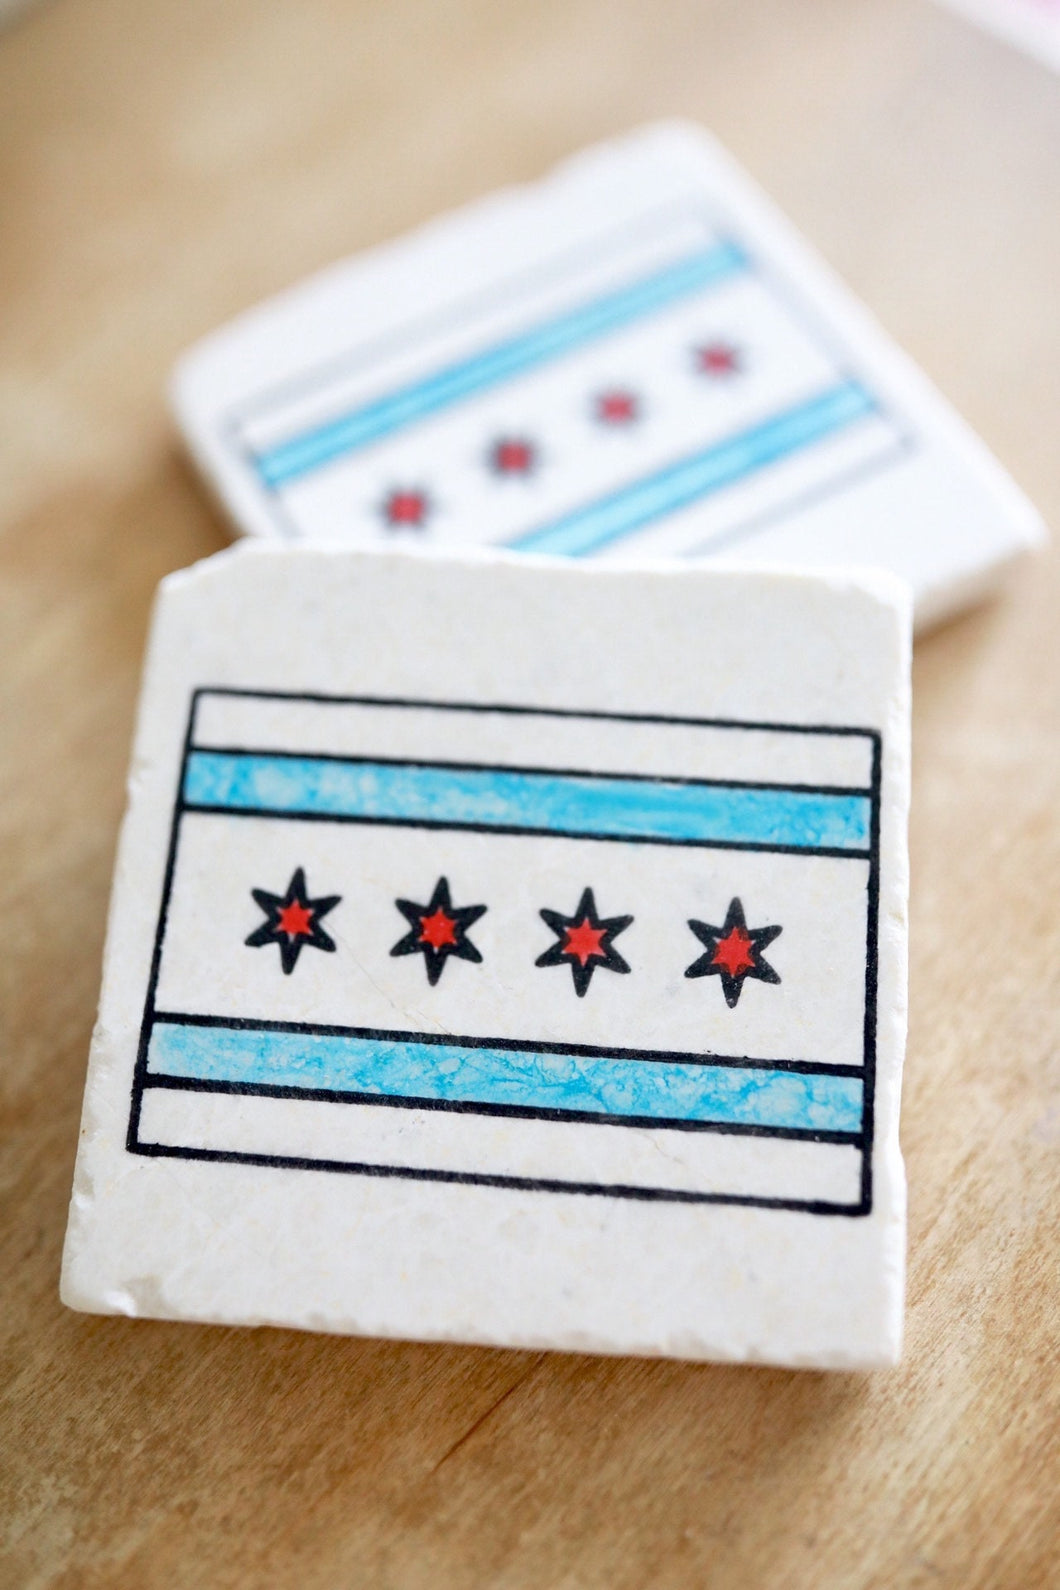 Chicago Flag Marble Coaster gift- Chicago Illinois- Marble Coasters- Tile coasters- Stone Coasters- free shipping